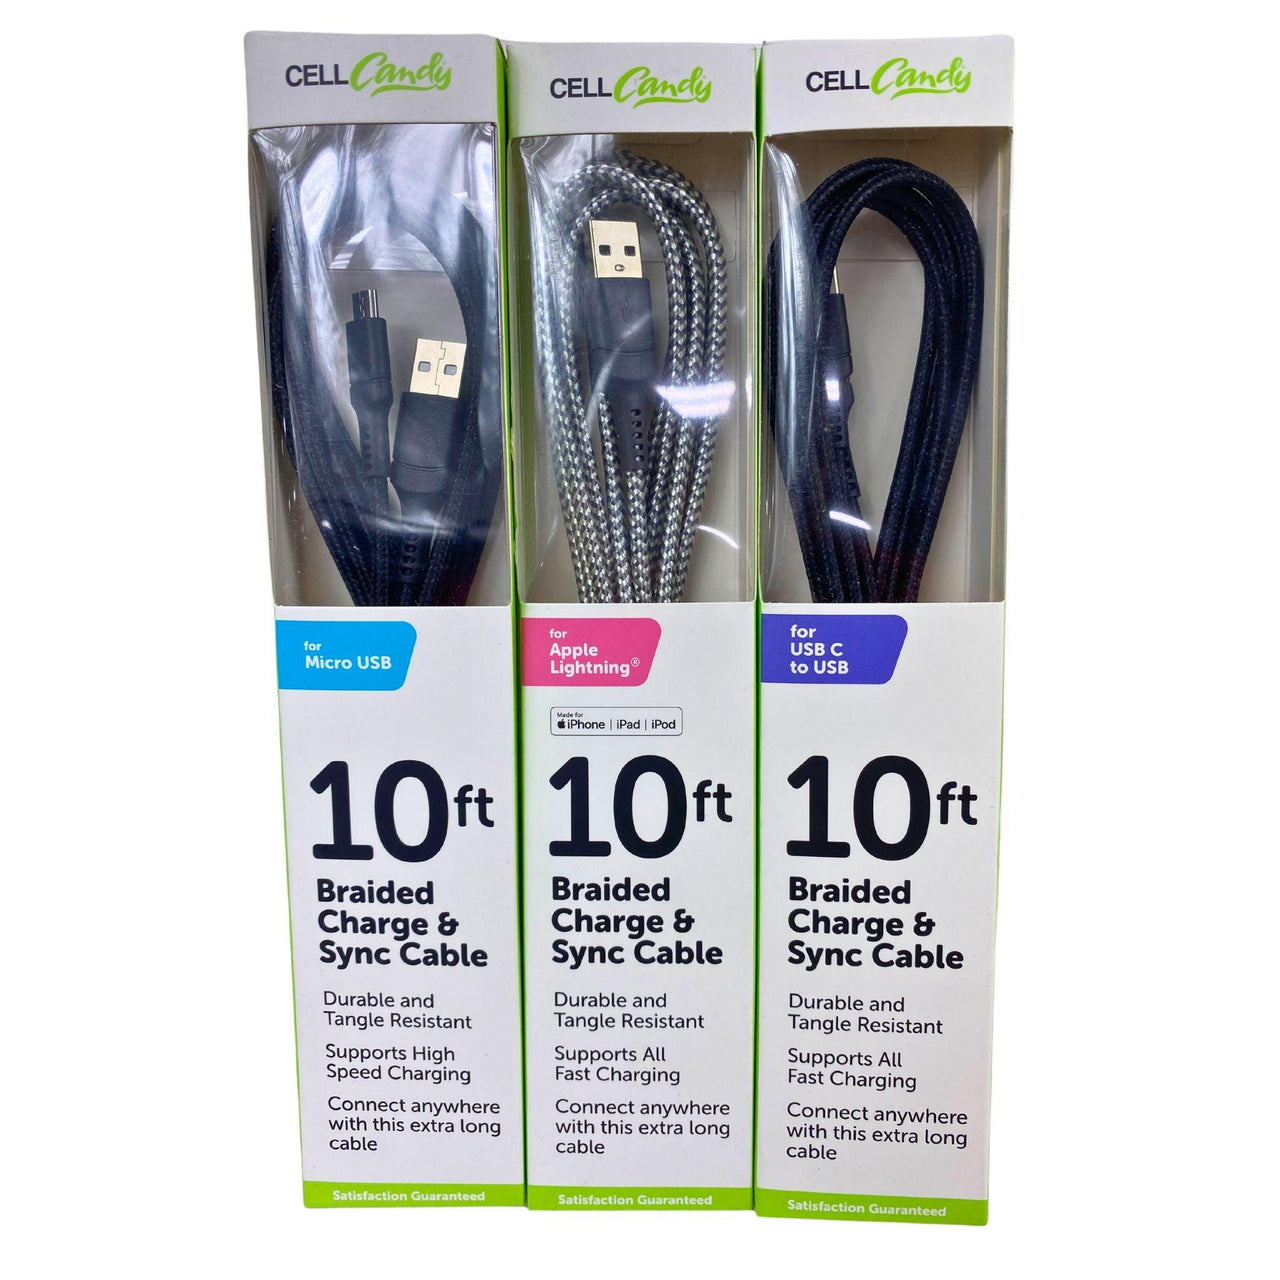 Cell Candy 10FT Braided Charge & Sync Cable for Micro USB (22 Pcs lot) - Discount Wholesalers Inc